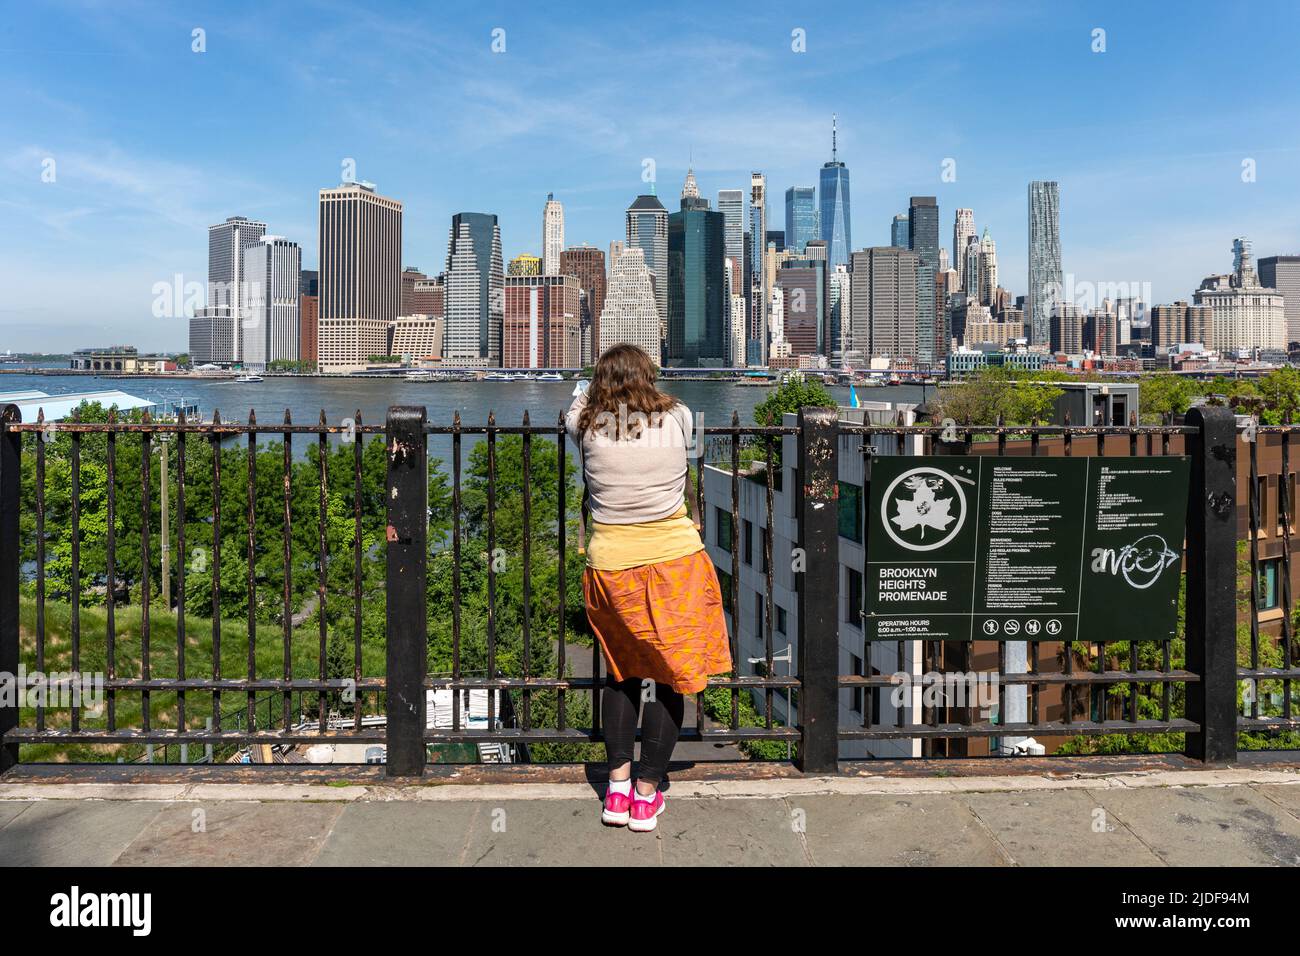 Woman looking at Lower Manhattan skyscrapers in Brooklyn Heights Promenade, New York City, United States of America Stock Photo